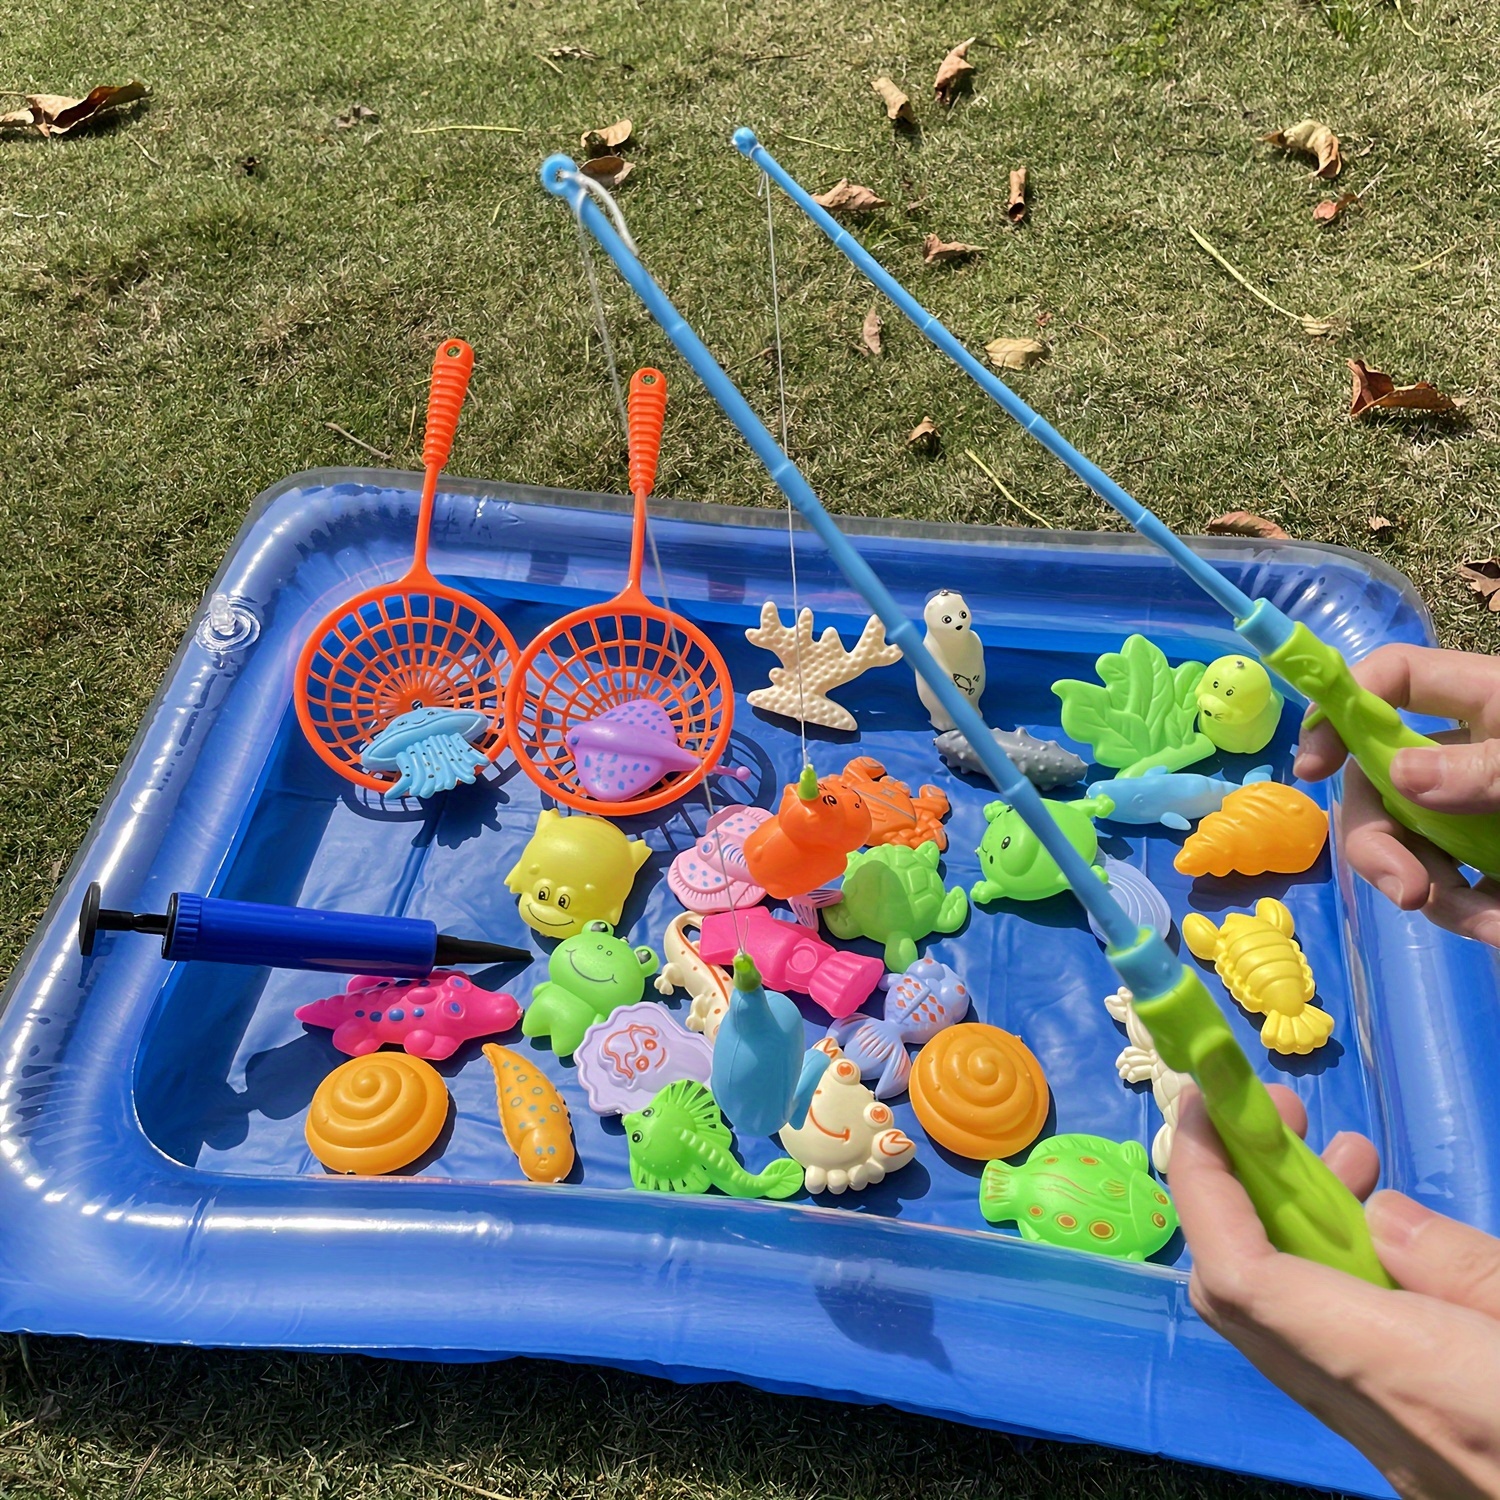 

Children's Fishing Game Pool Set - Educational Early Learning Toy With Inflatable Play Pond & Assorted Aquatic Creature Toys - Ideal For Halloween & Christmas Gifts - Suitable For Ages 3 To 6 Years